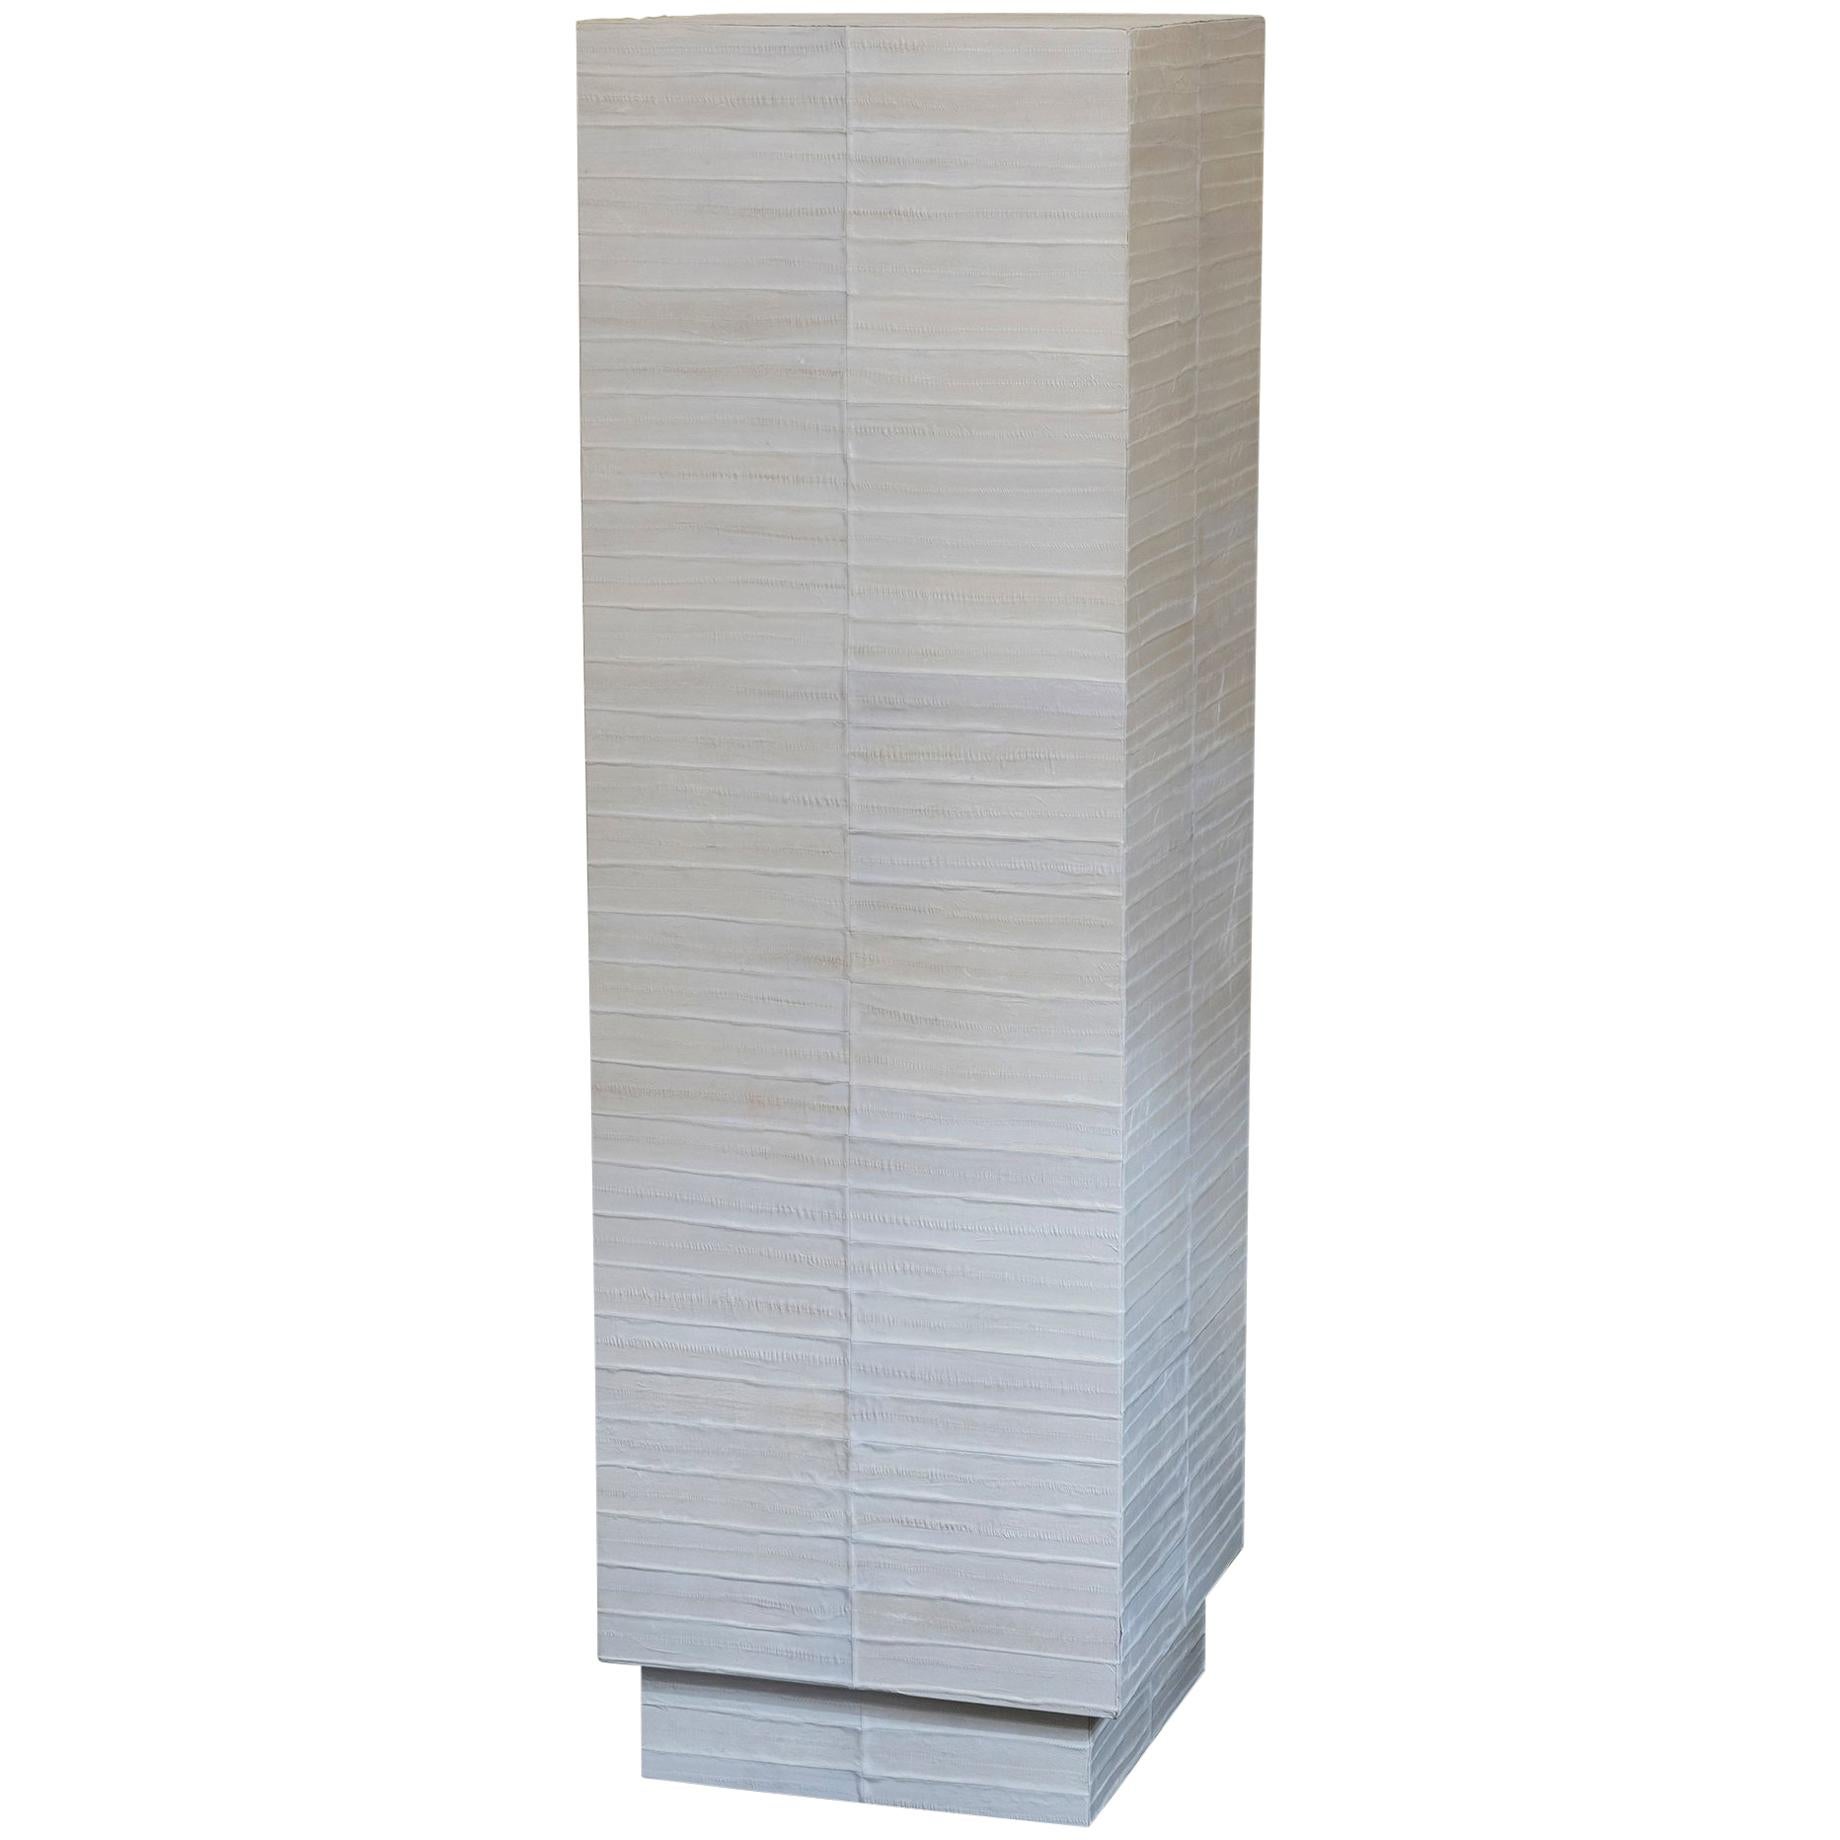 Tall Wood and Ivory Eel Skin Flair Edition Contemporary Pedestal, Italy 2019